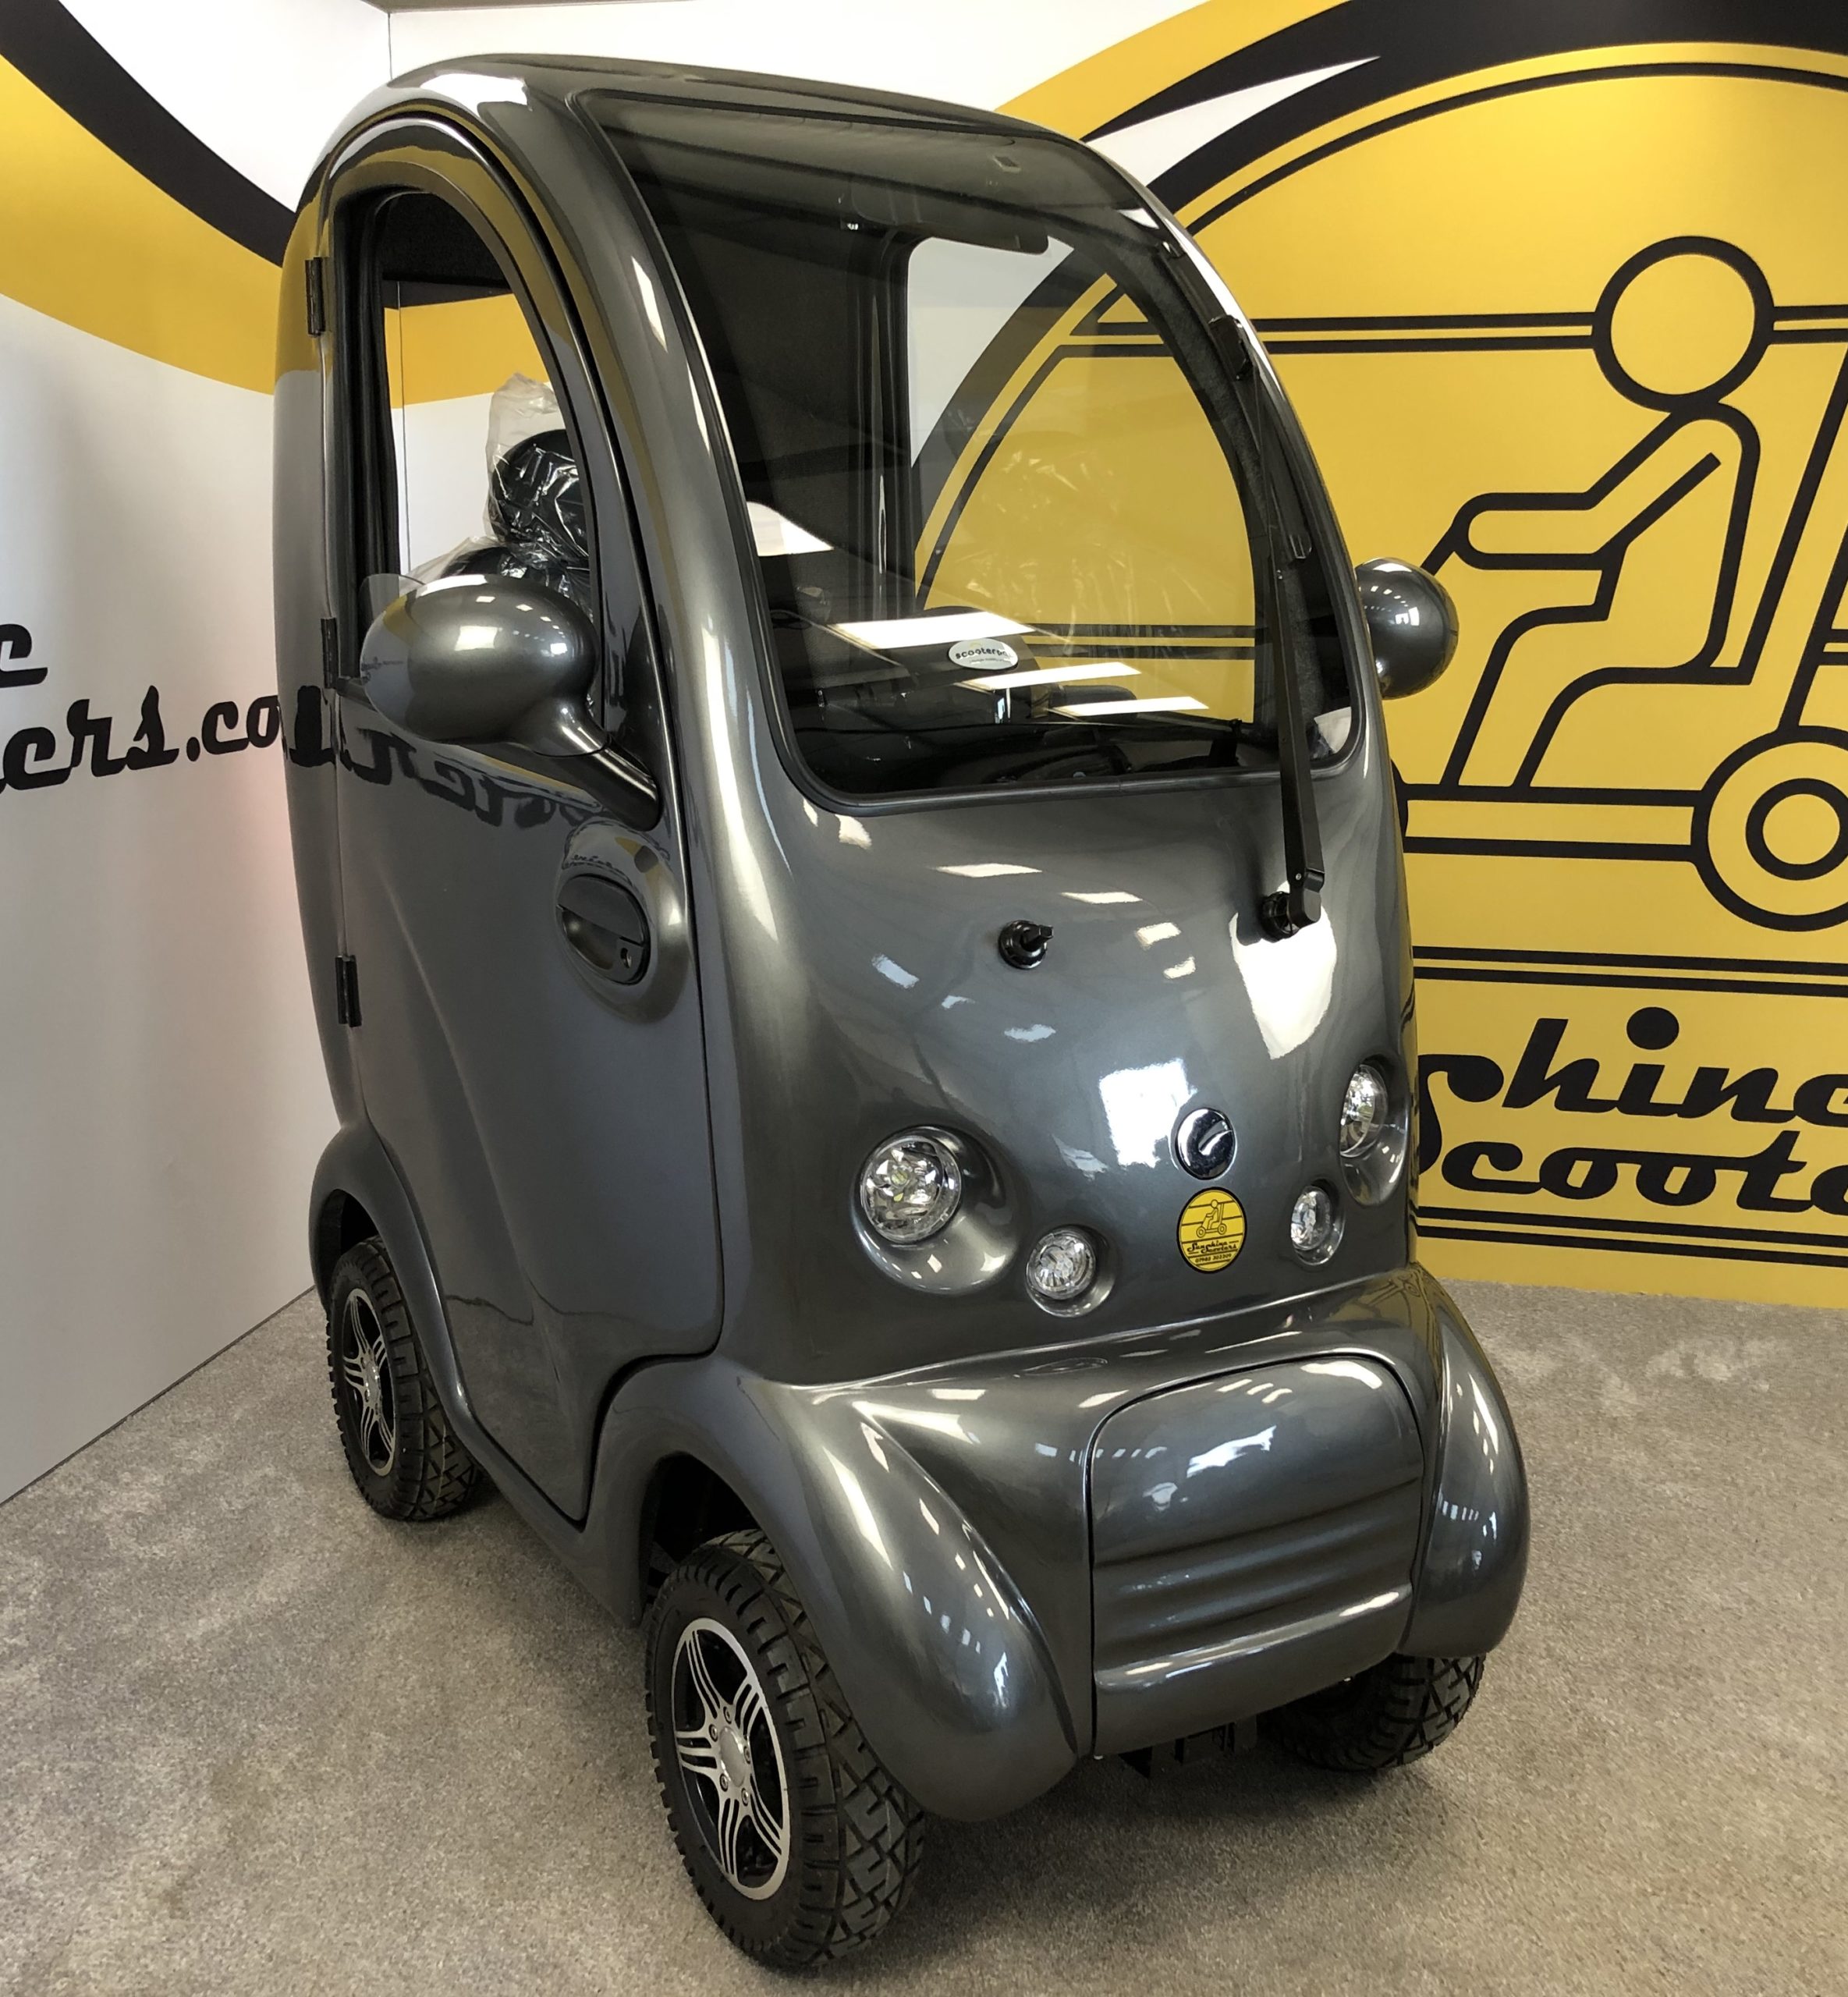 Scooterpac Cabin Car Mk2 Plus Electric Mobility Scooter Sunshine Scooters